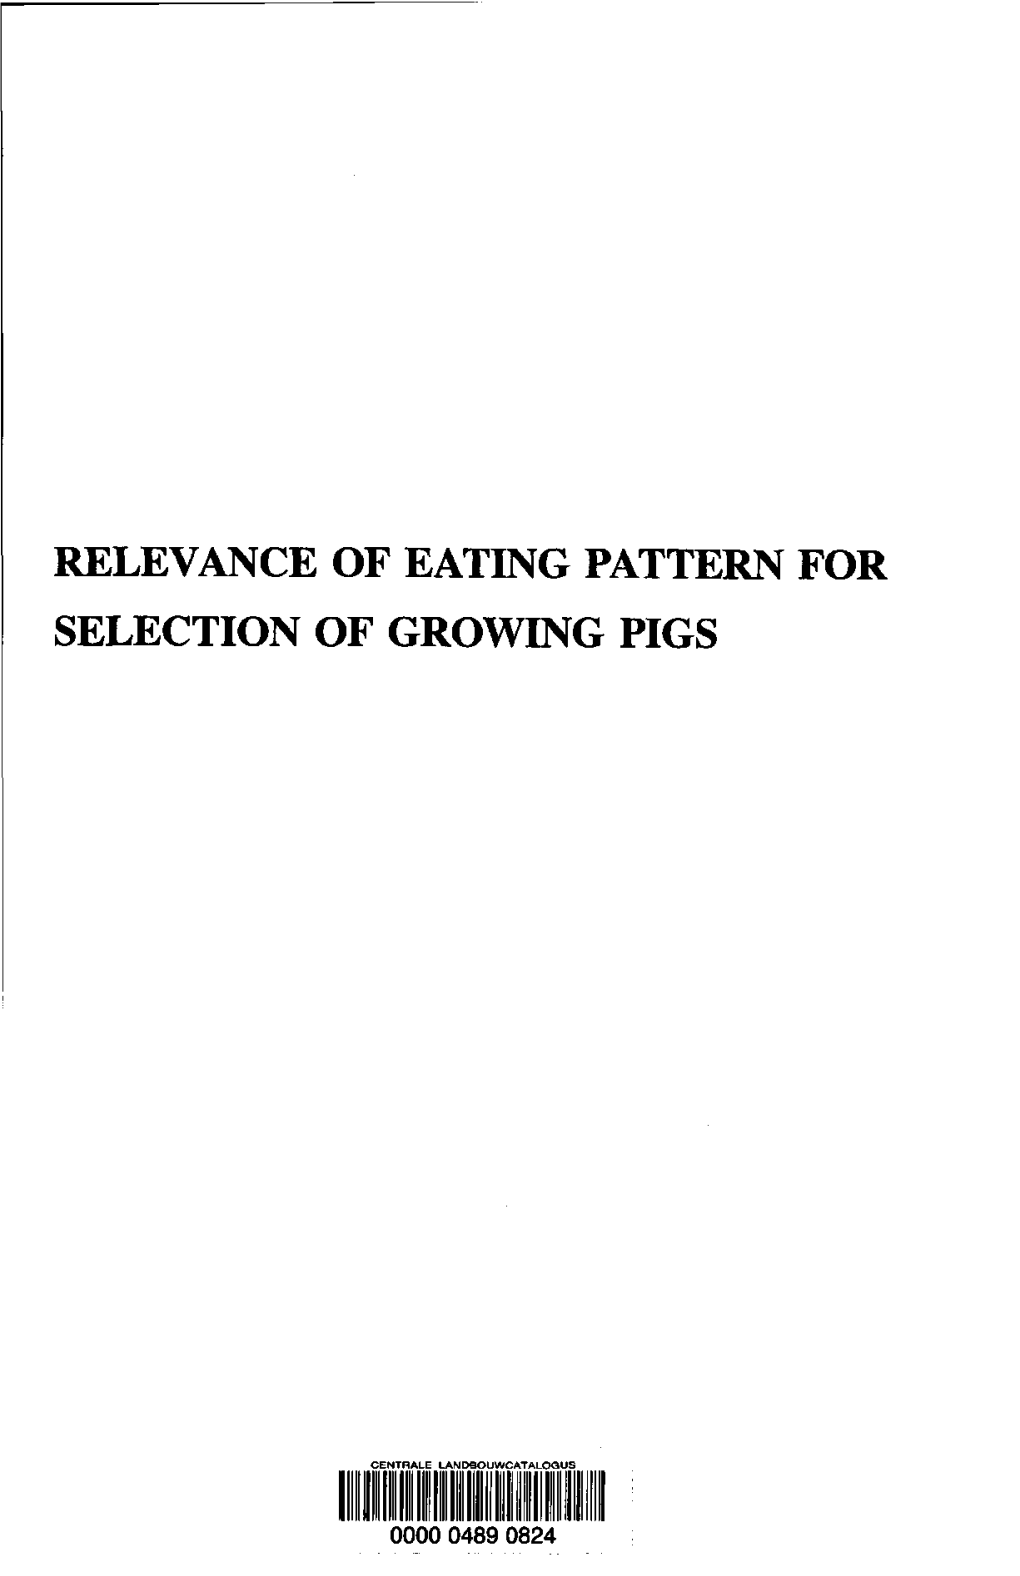 Relevance of Eating Pattern for Selection of Growing Pigs